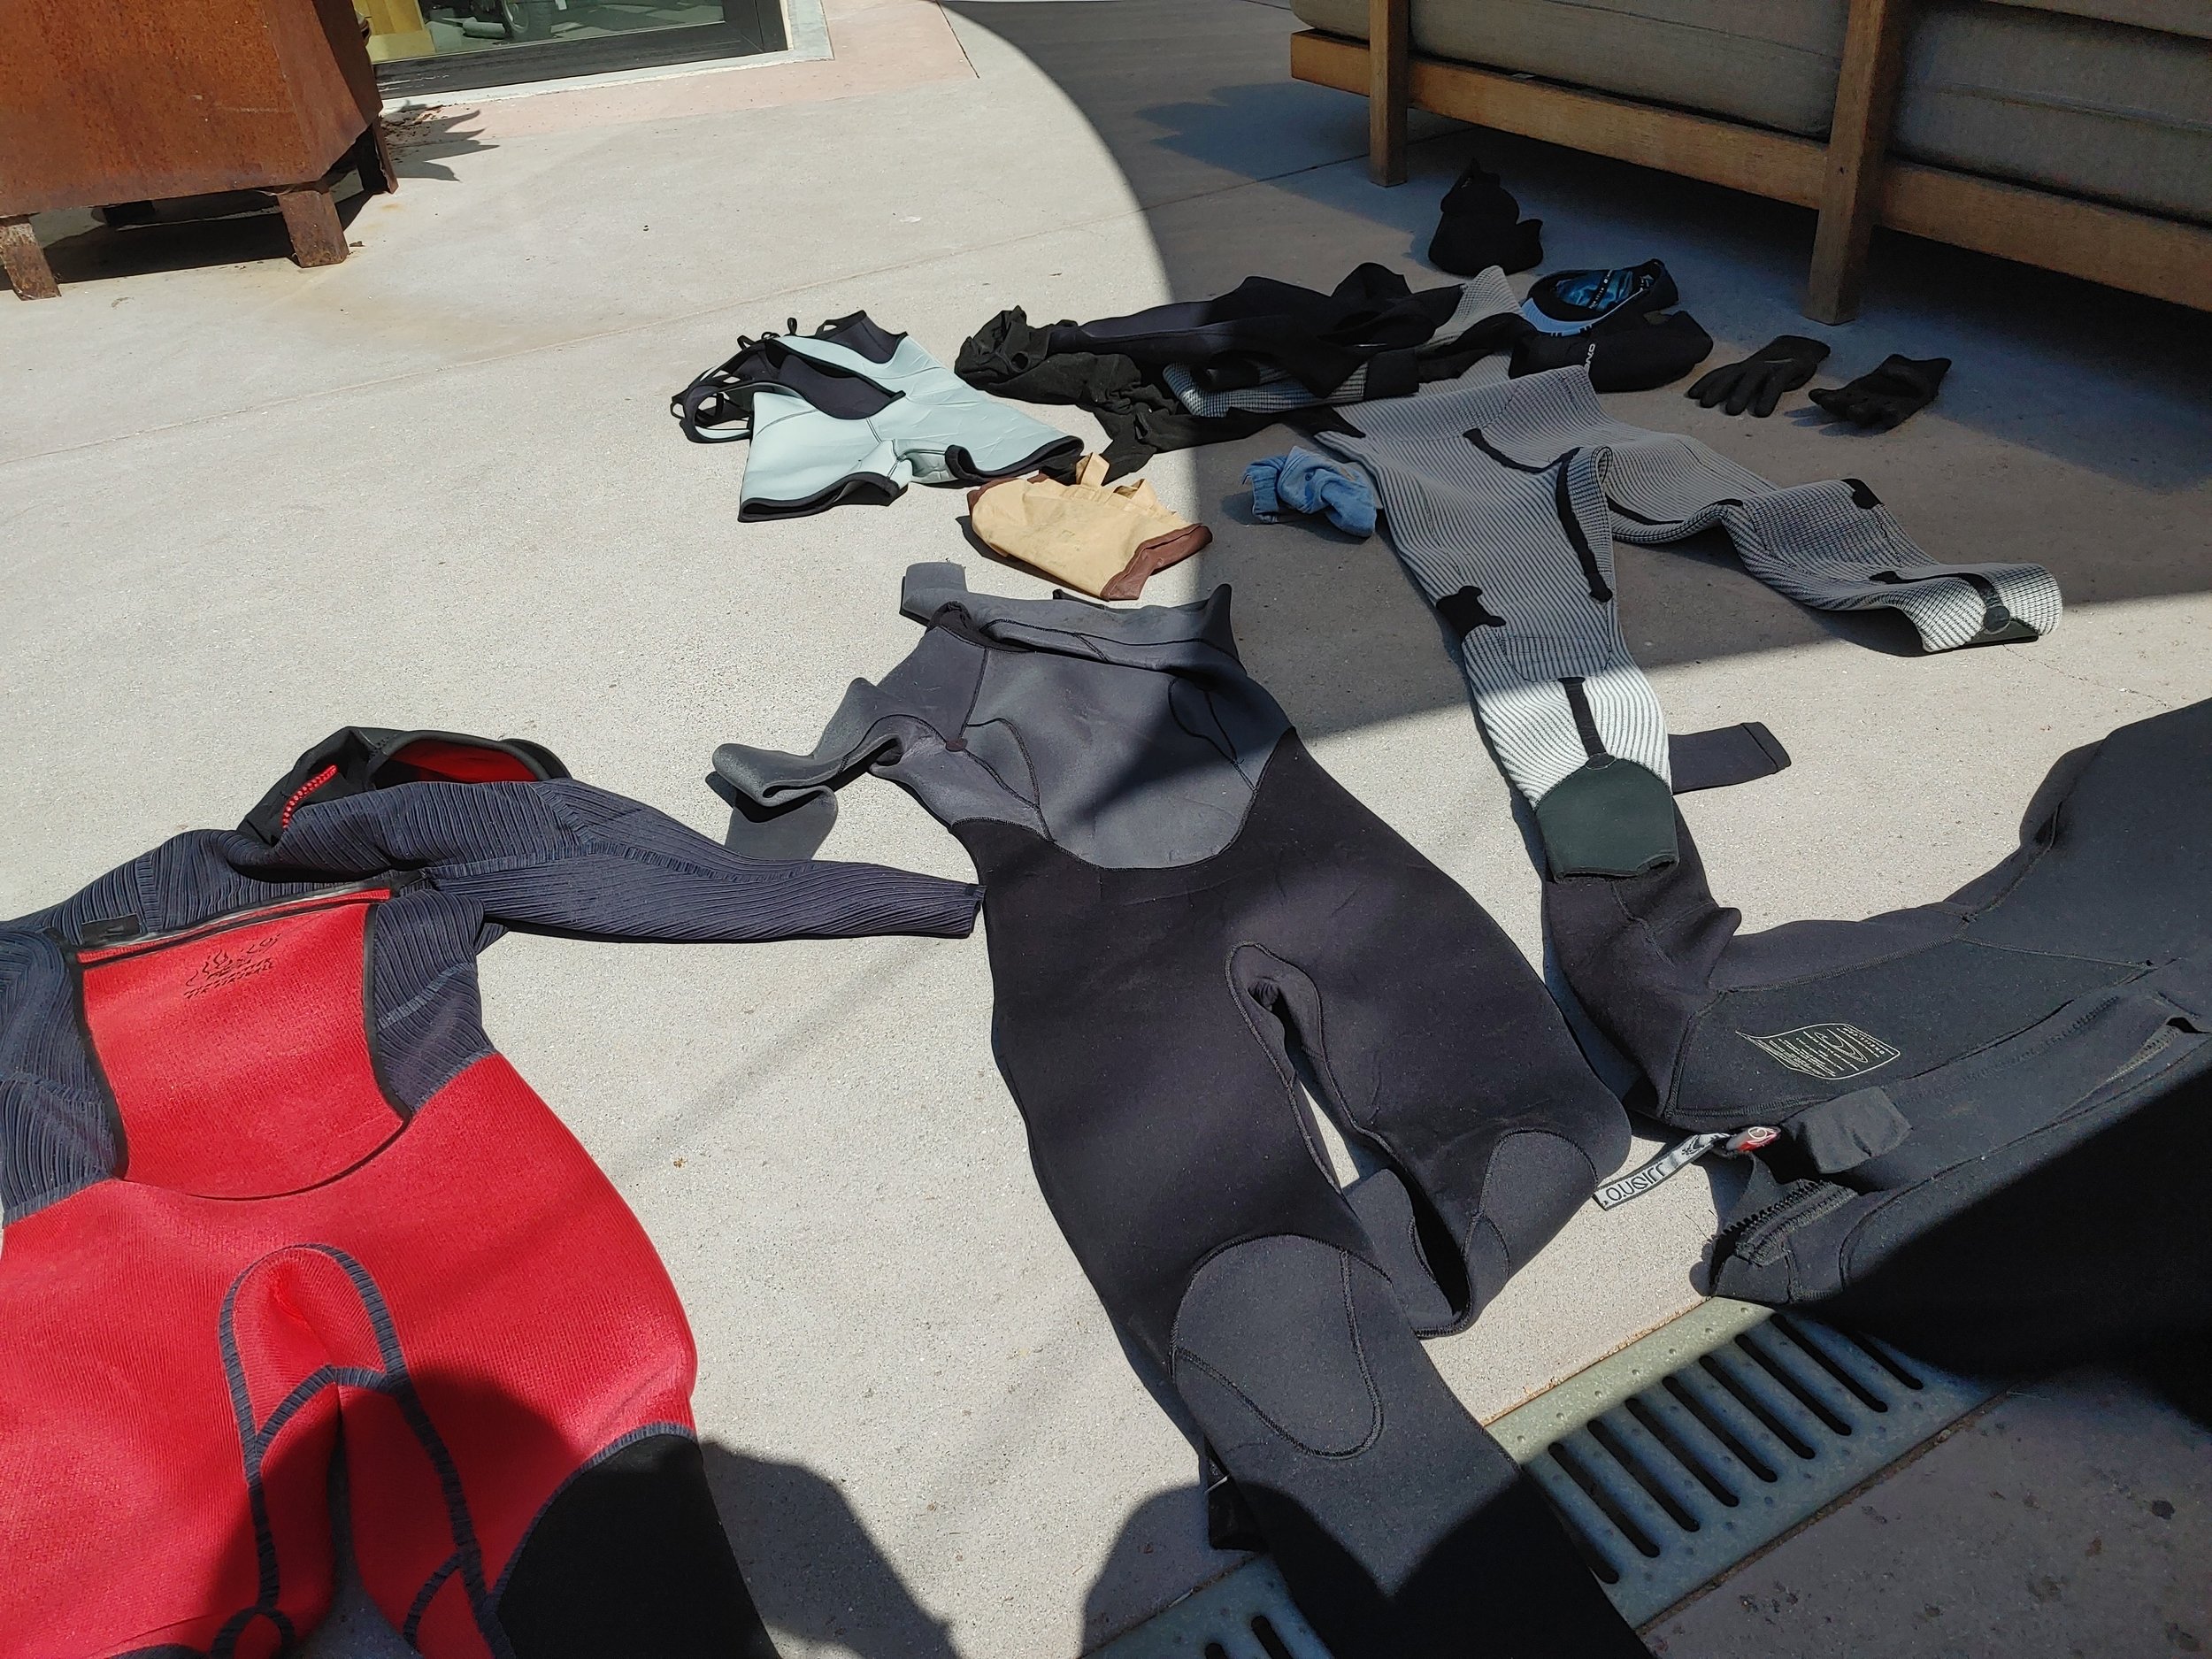  I went surfing with my financial advisor today, it was nice! But then I found out all of my wetsuits were covered in mold so I had to launder all of them and put them out to dry. 